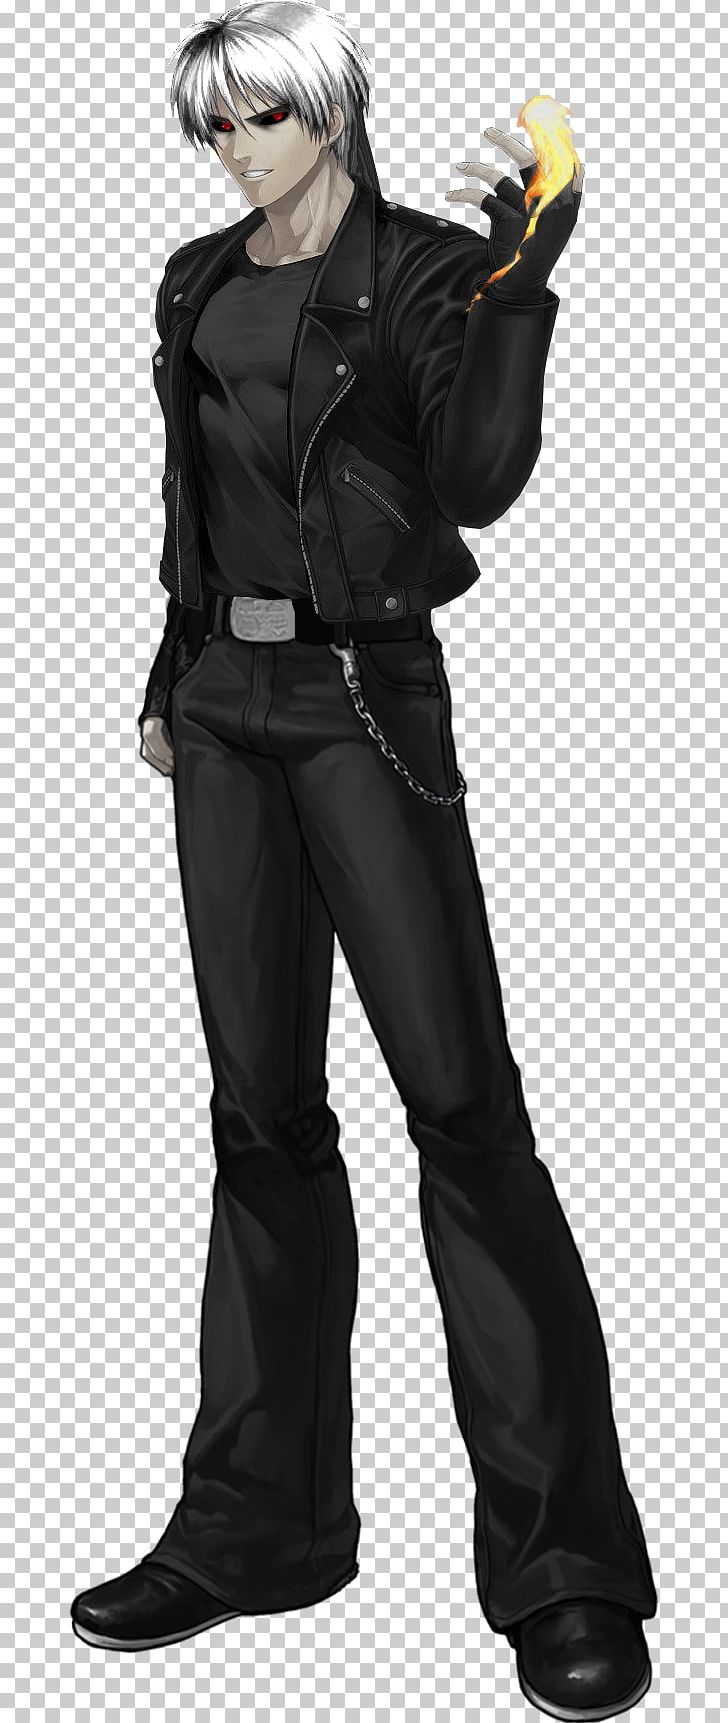 The King Of Fighters XIII Kyo Kusanagi M.U.G.E.N Iori Yagami Orochi PNG, Clipart, Action Figure, Anime, Art, Character, Costume Free PNG Download